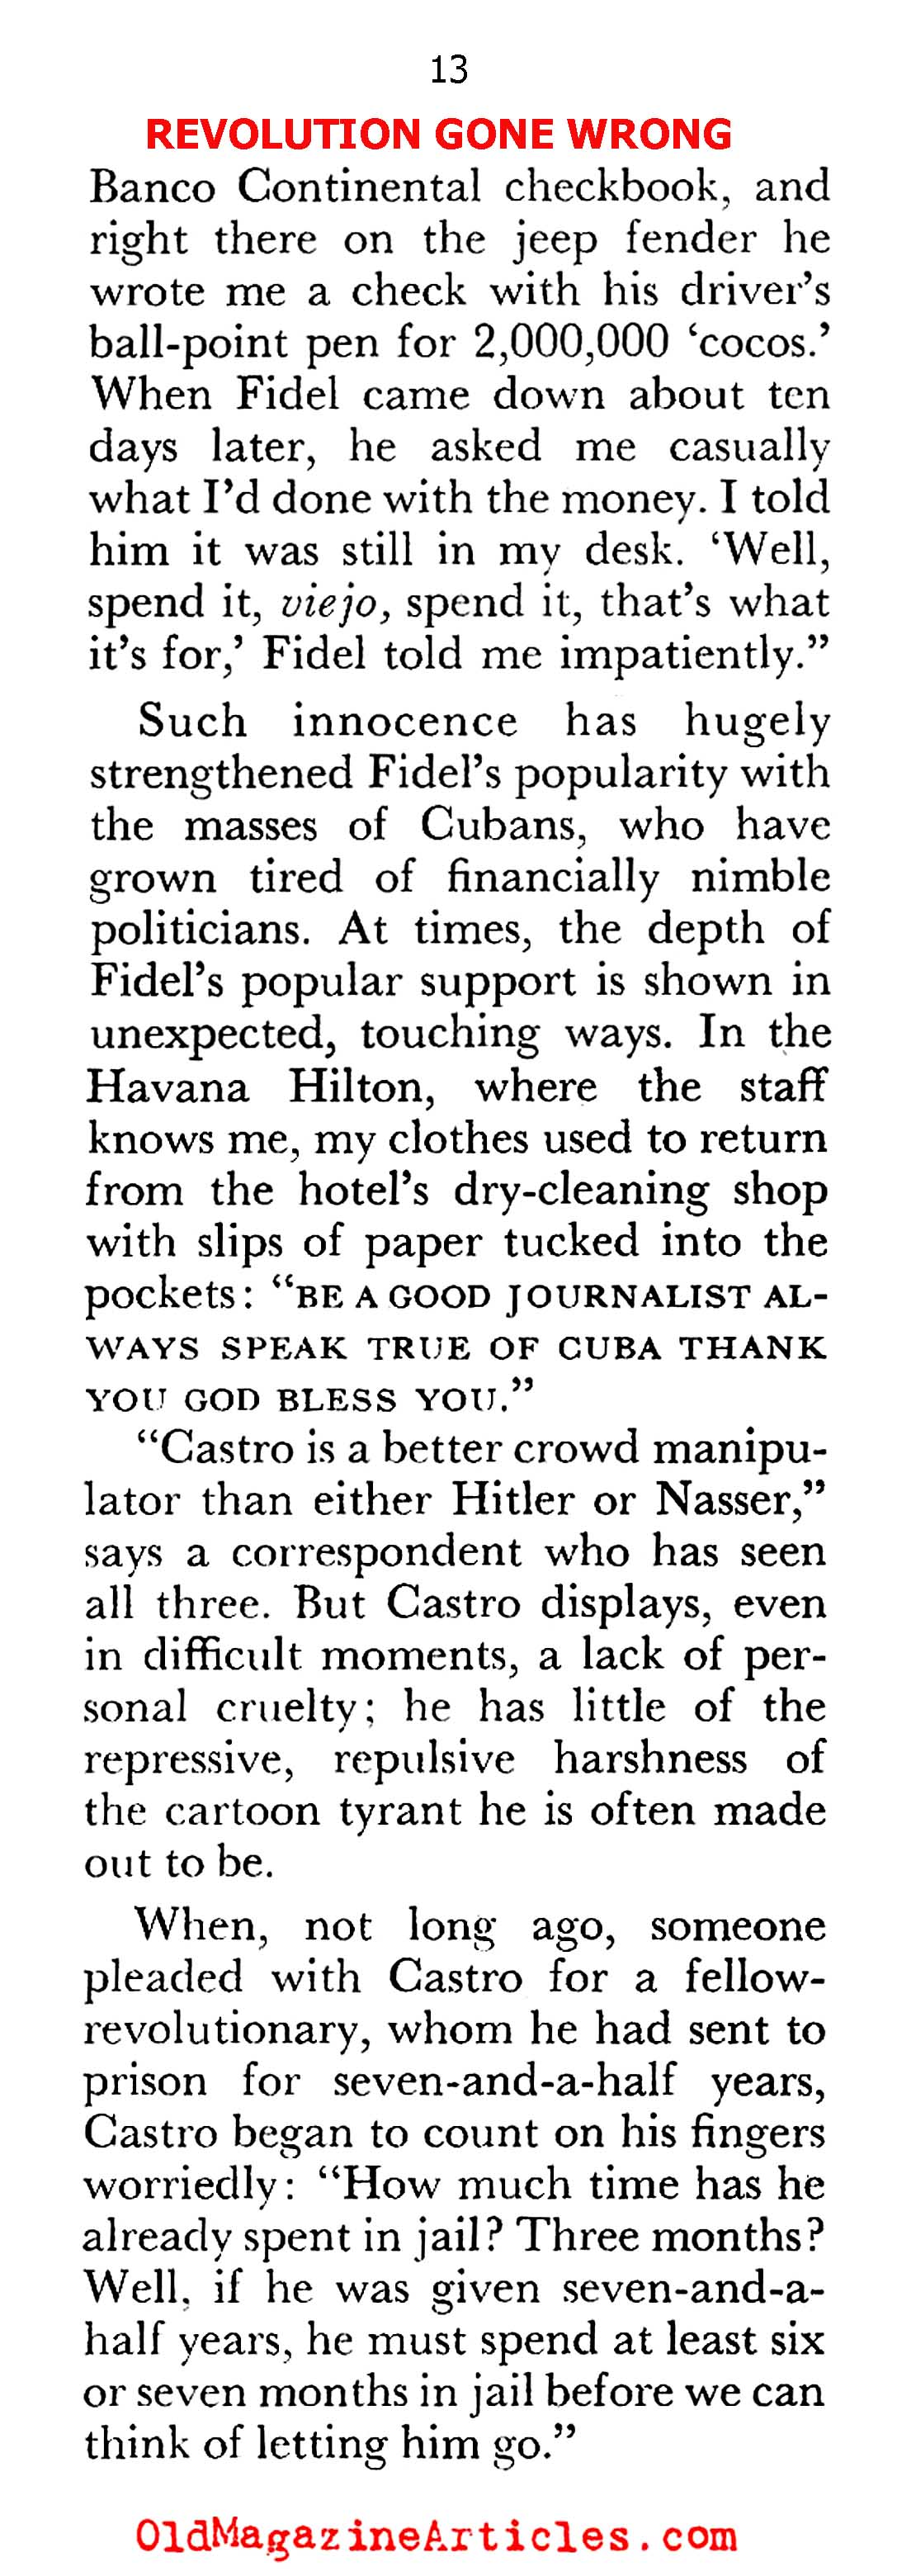 Castro Shows His Hand... (Pageant Magazine, 1960)